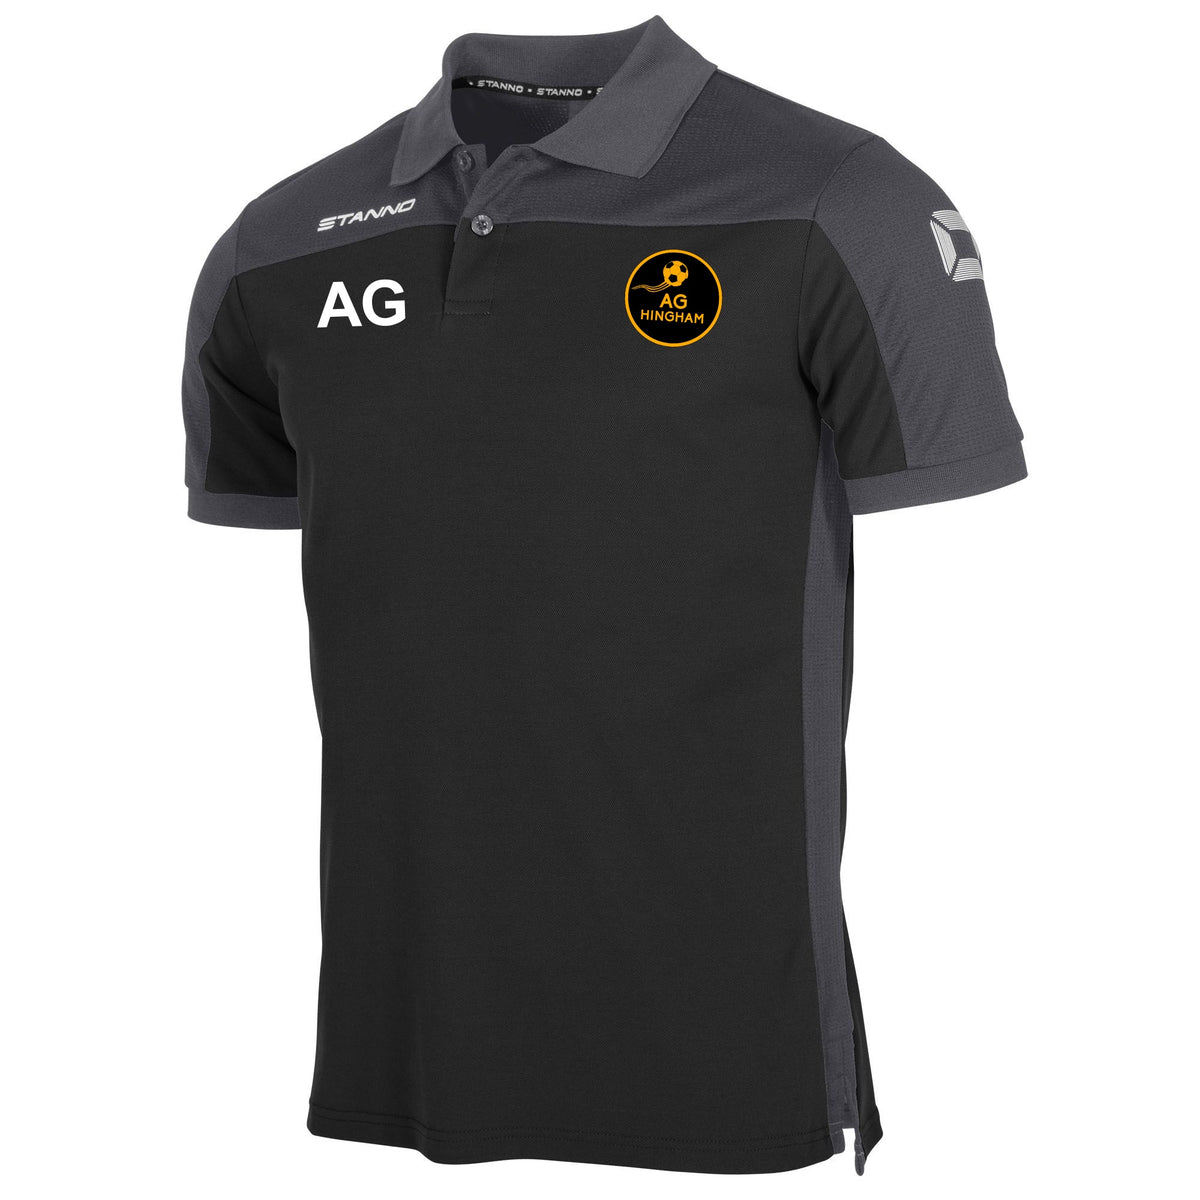 AG Hingham Stanno Pride Polo in Adult